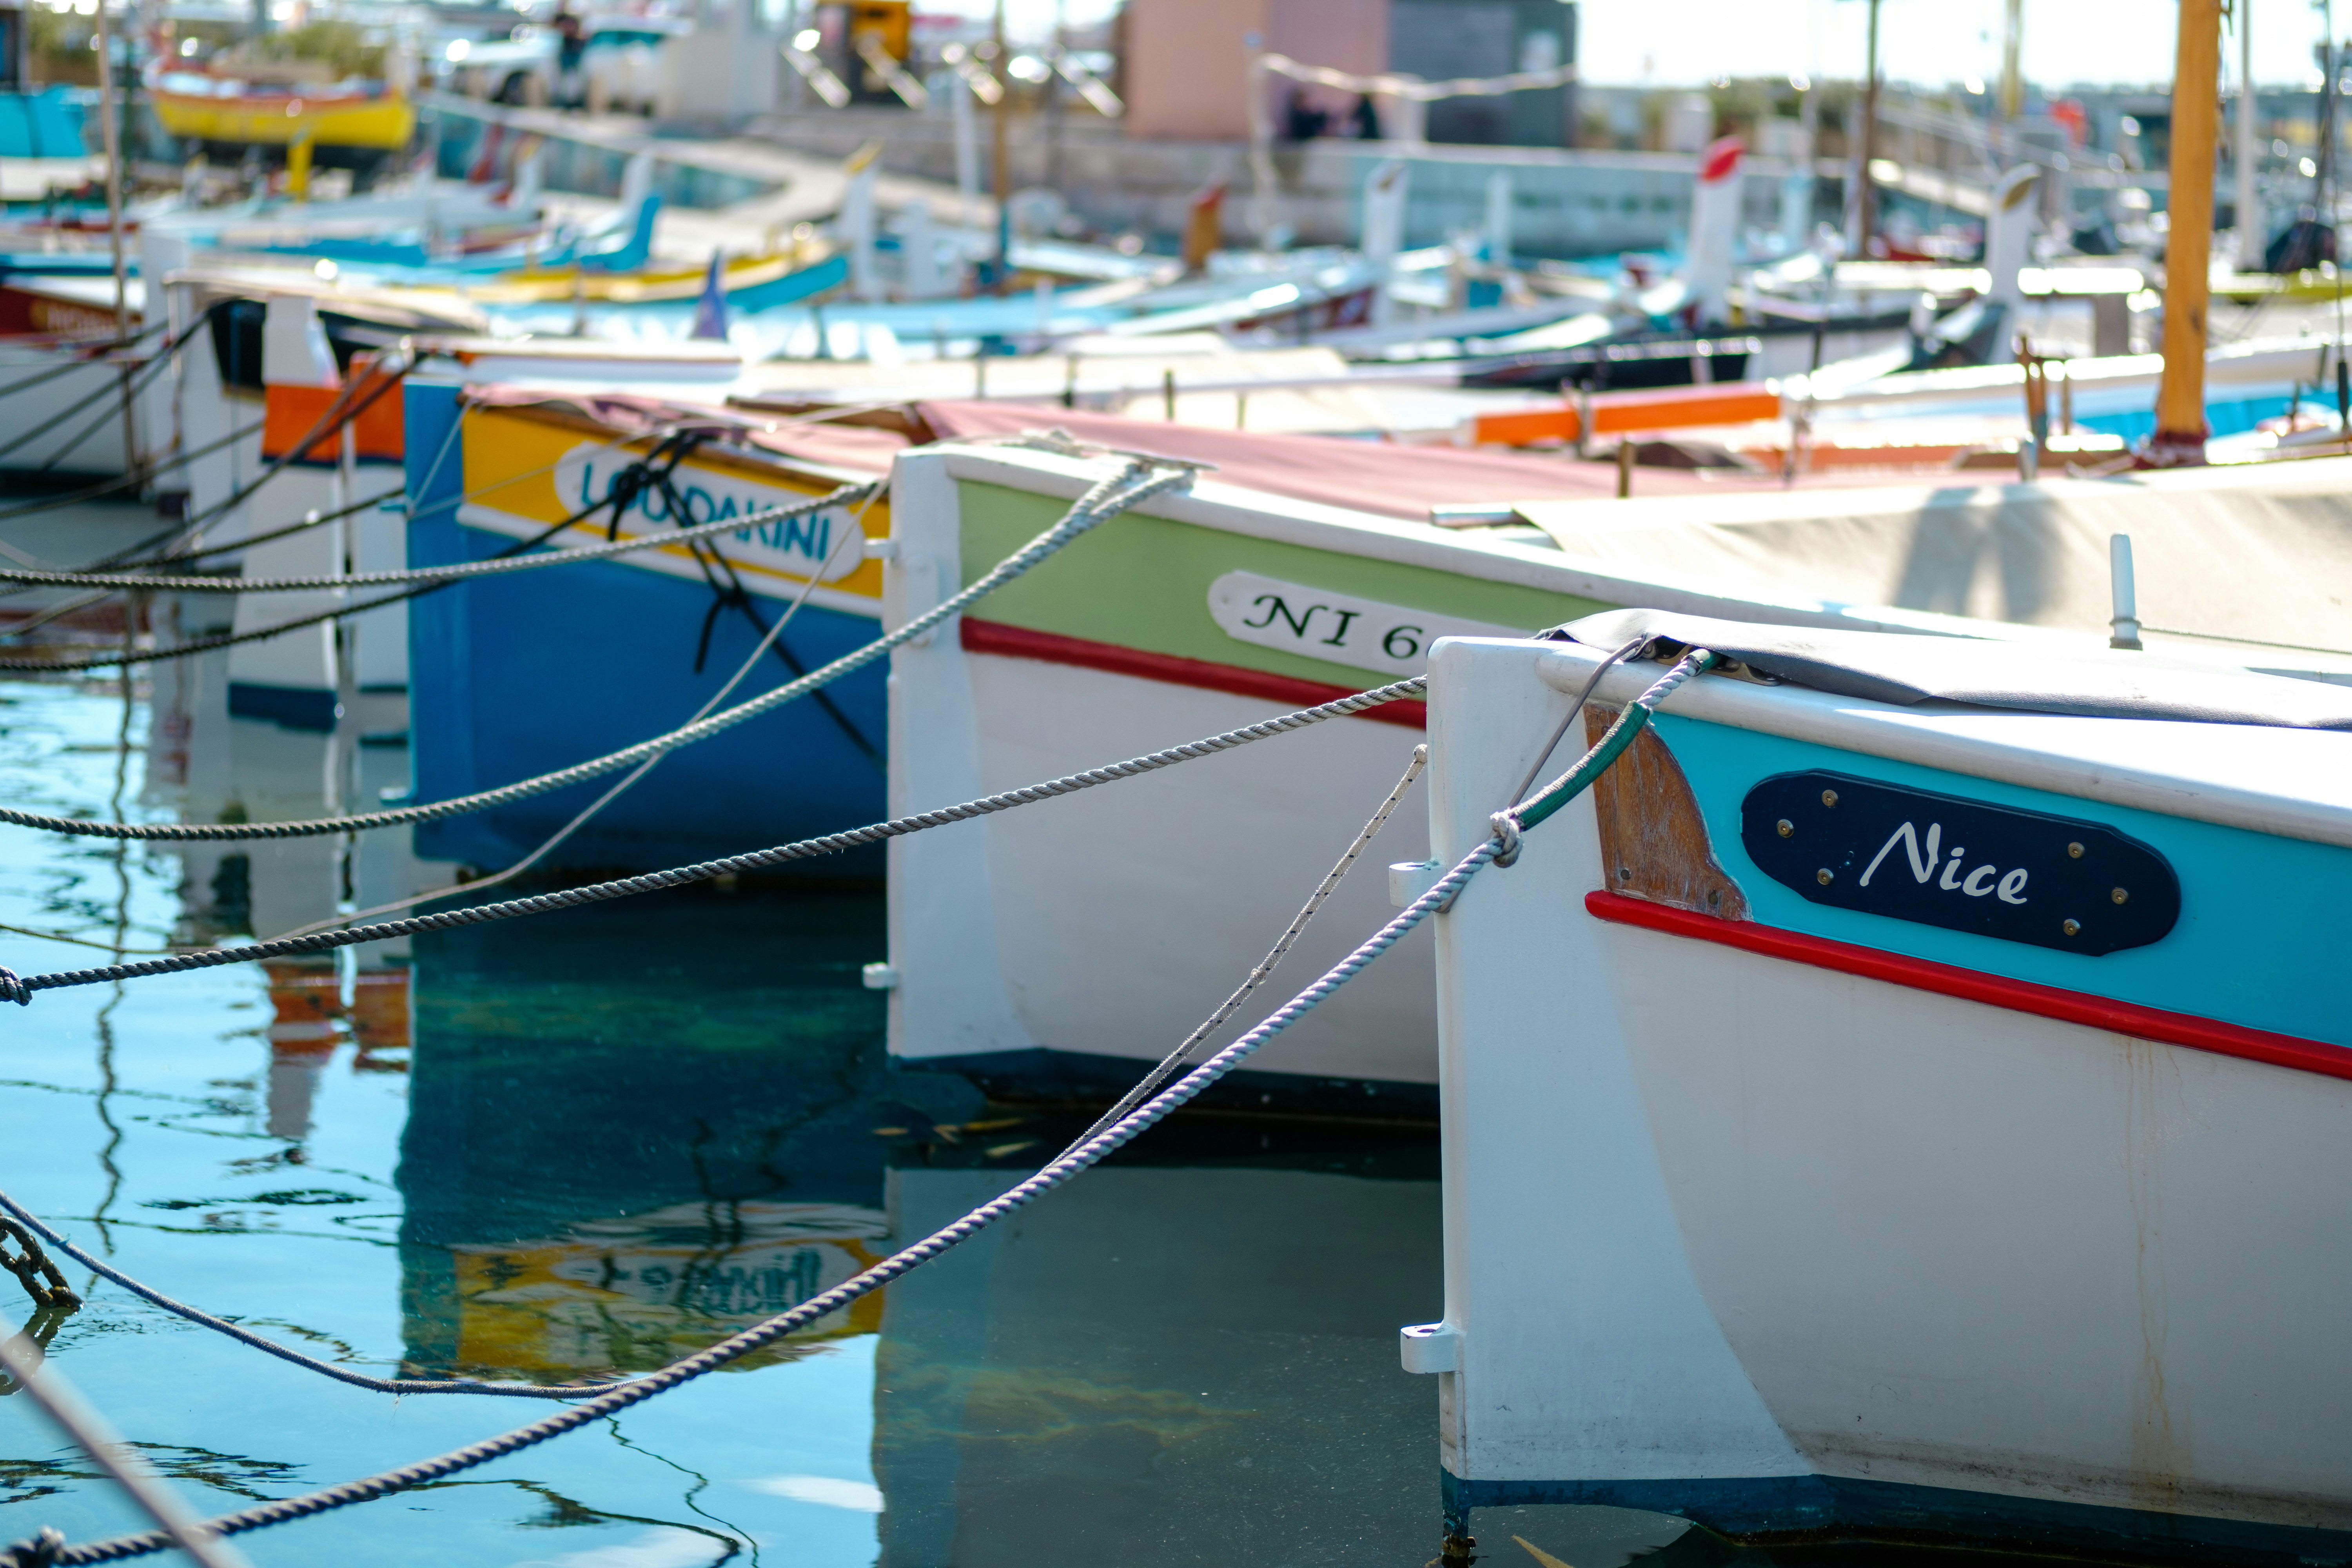 boats on dock during daytime